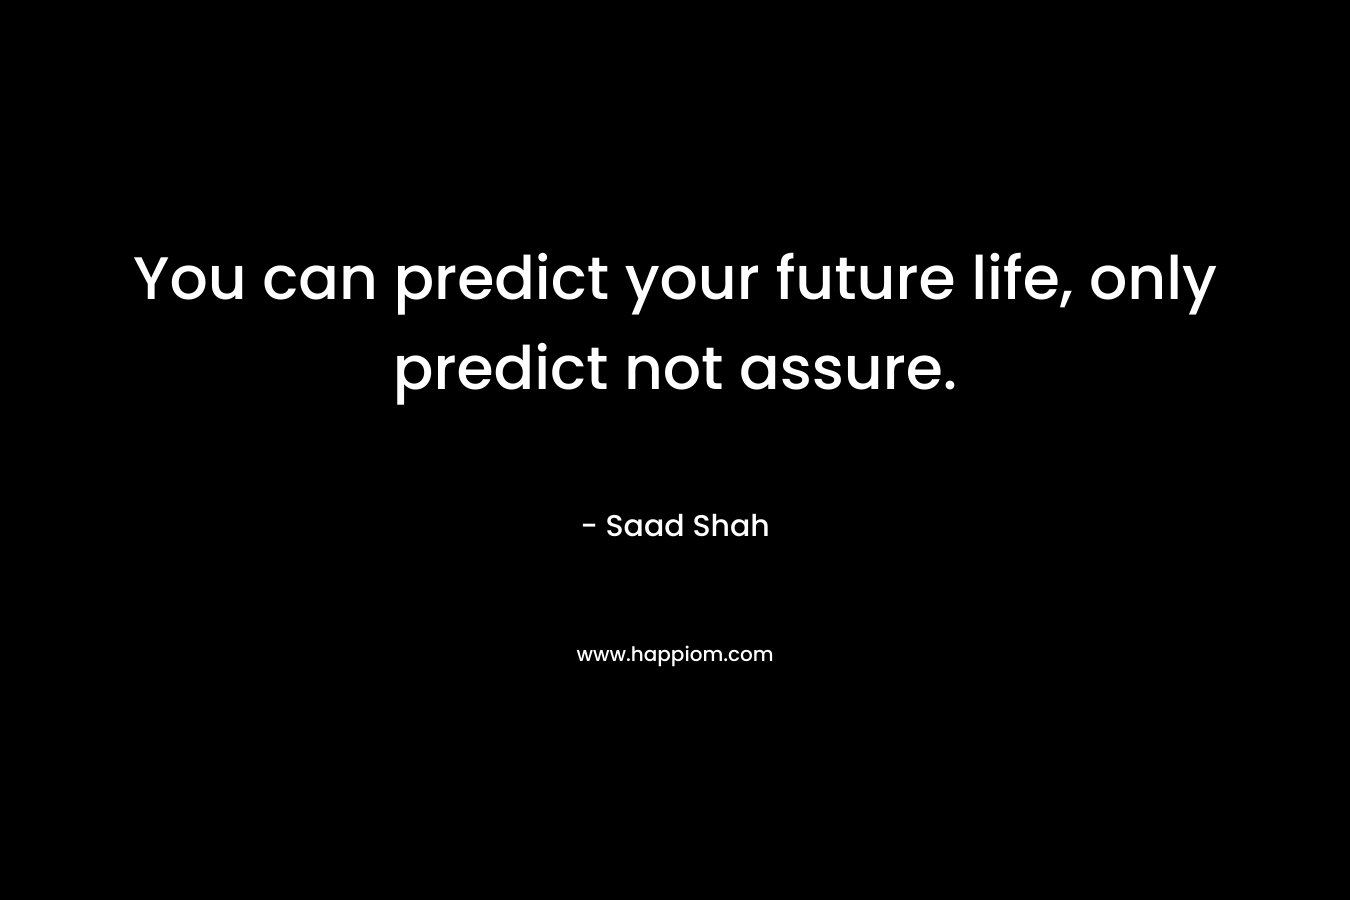 You can predict your future life, only predict not assure.